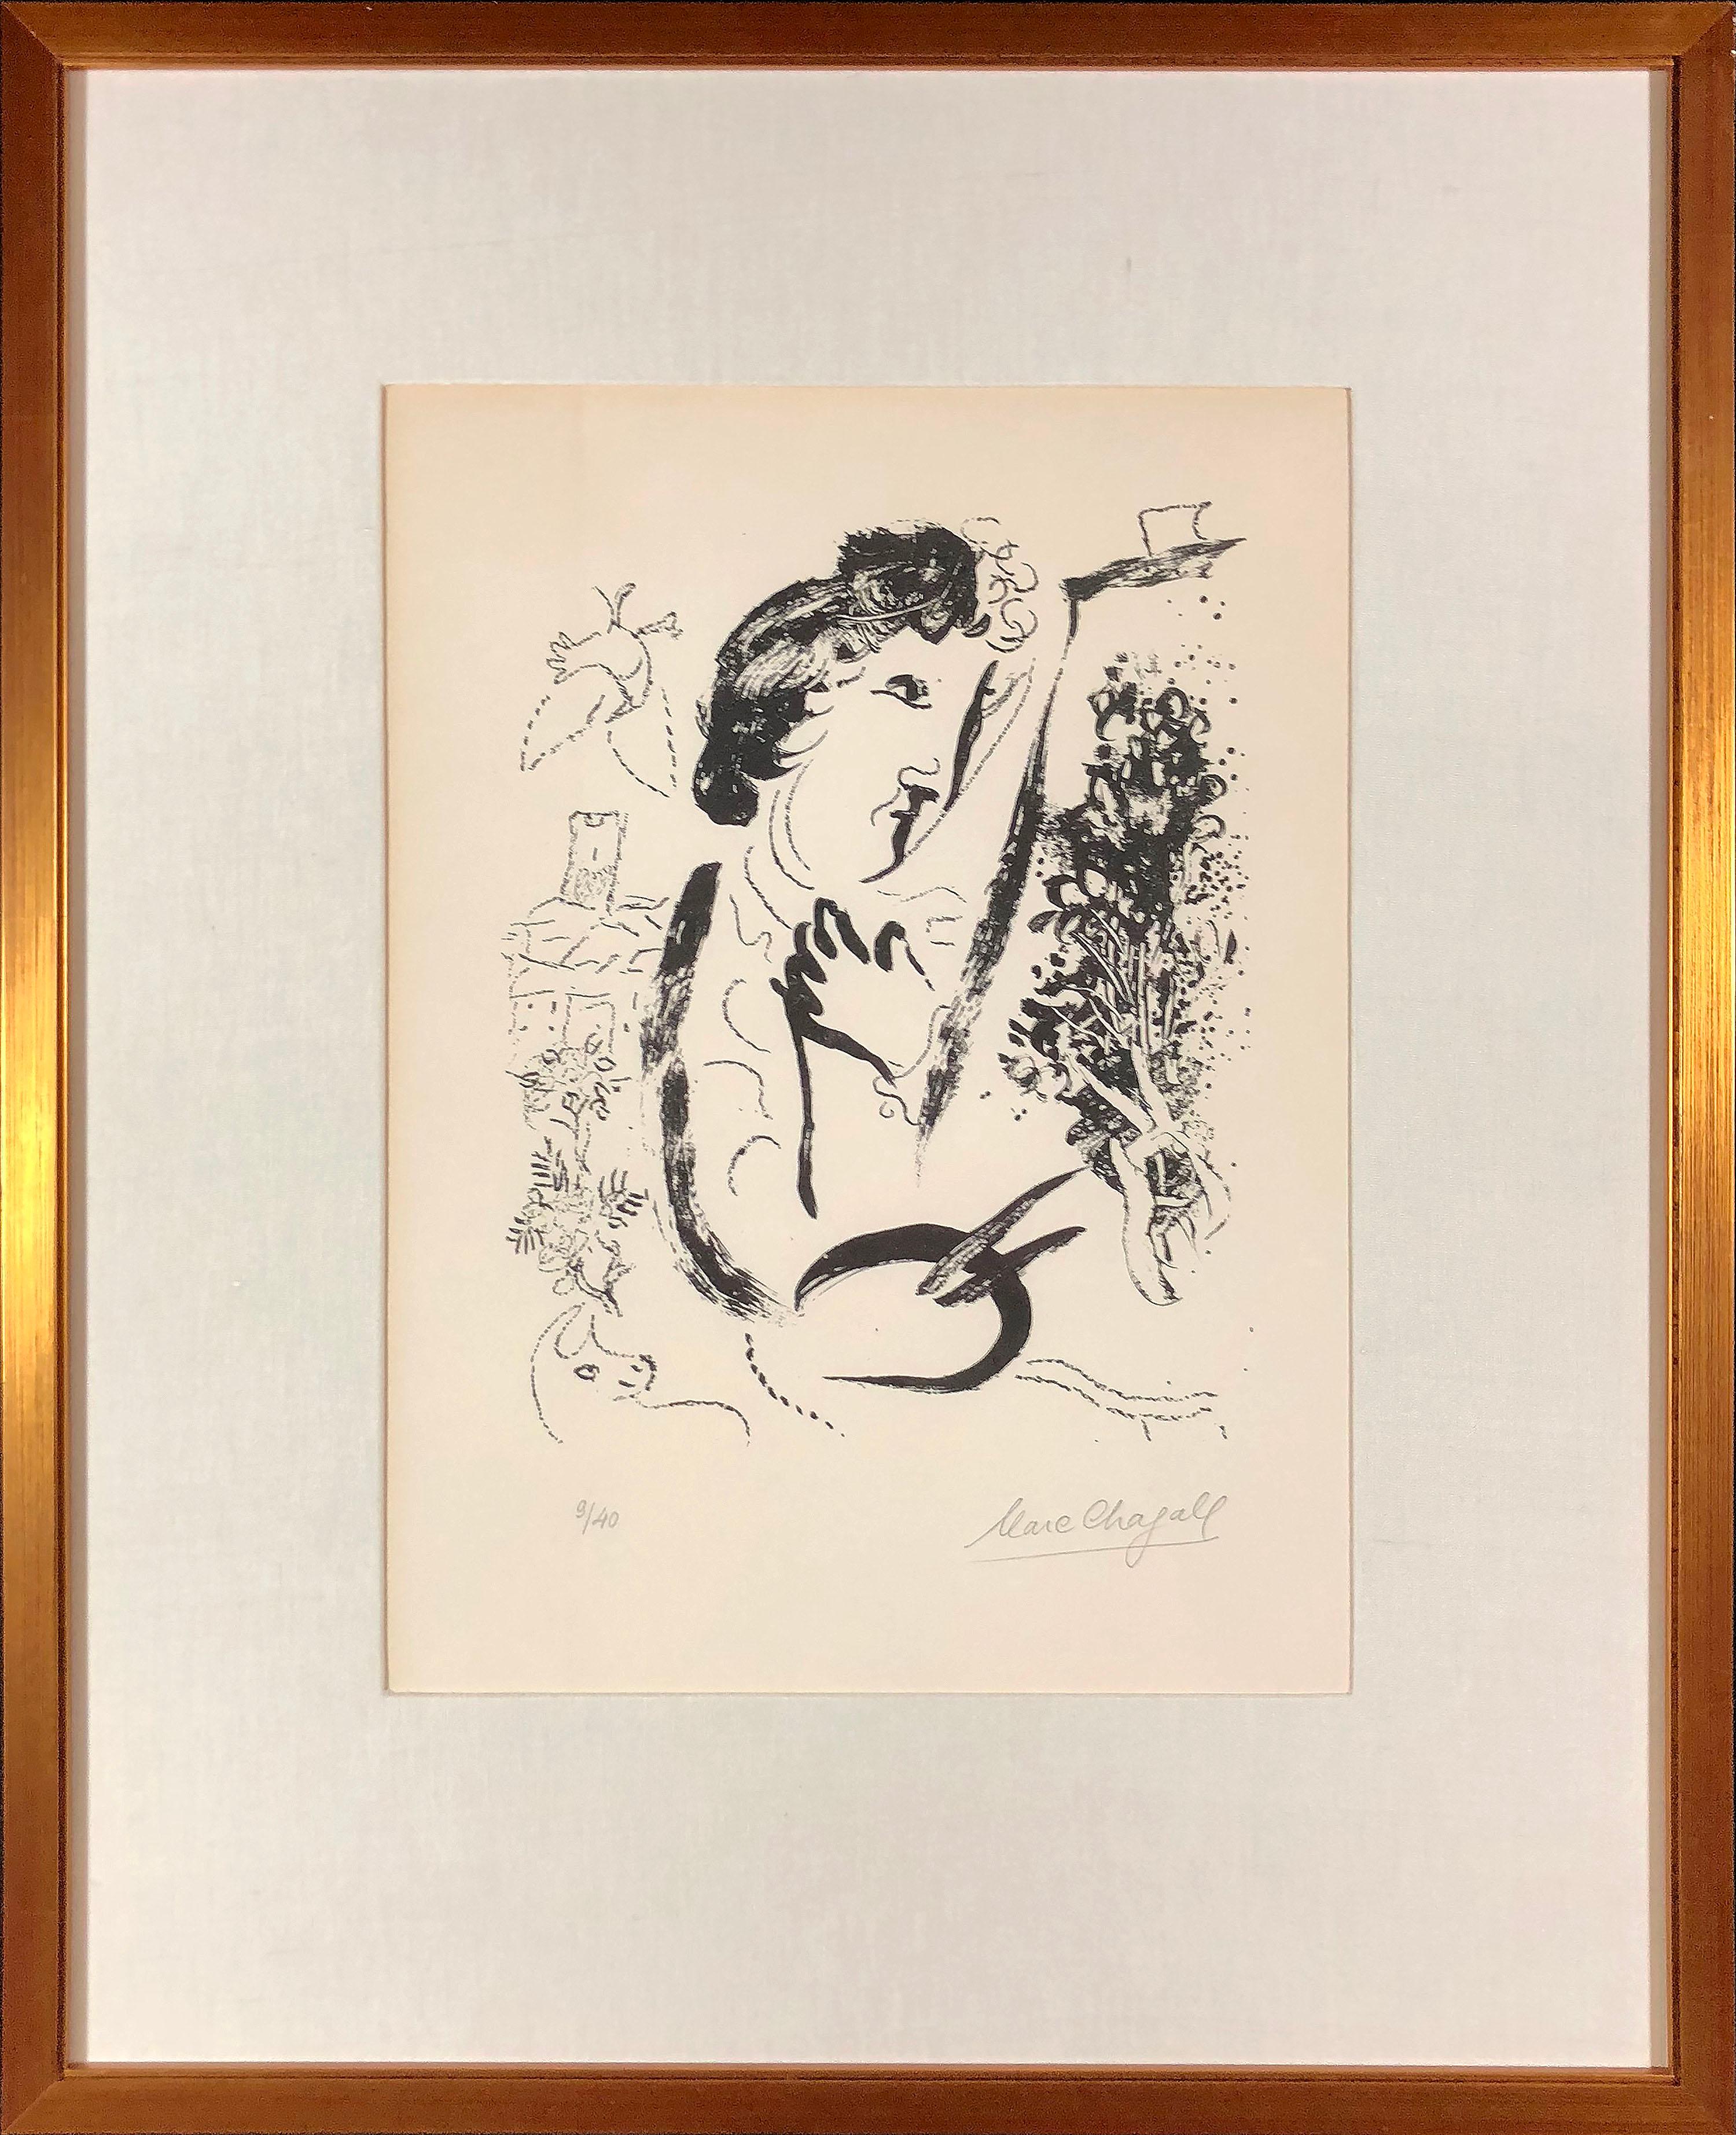 Devant le Tableau (Signed and Numbered) - Print by Marc Chagall